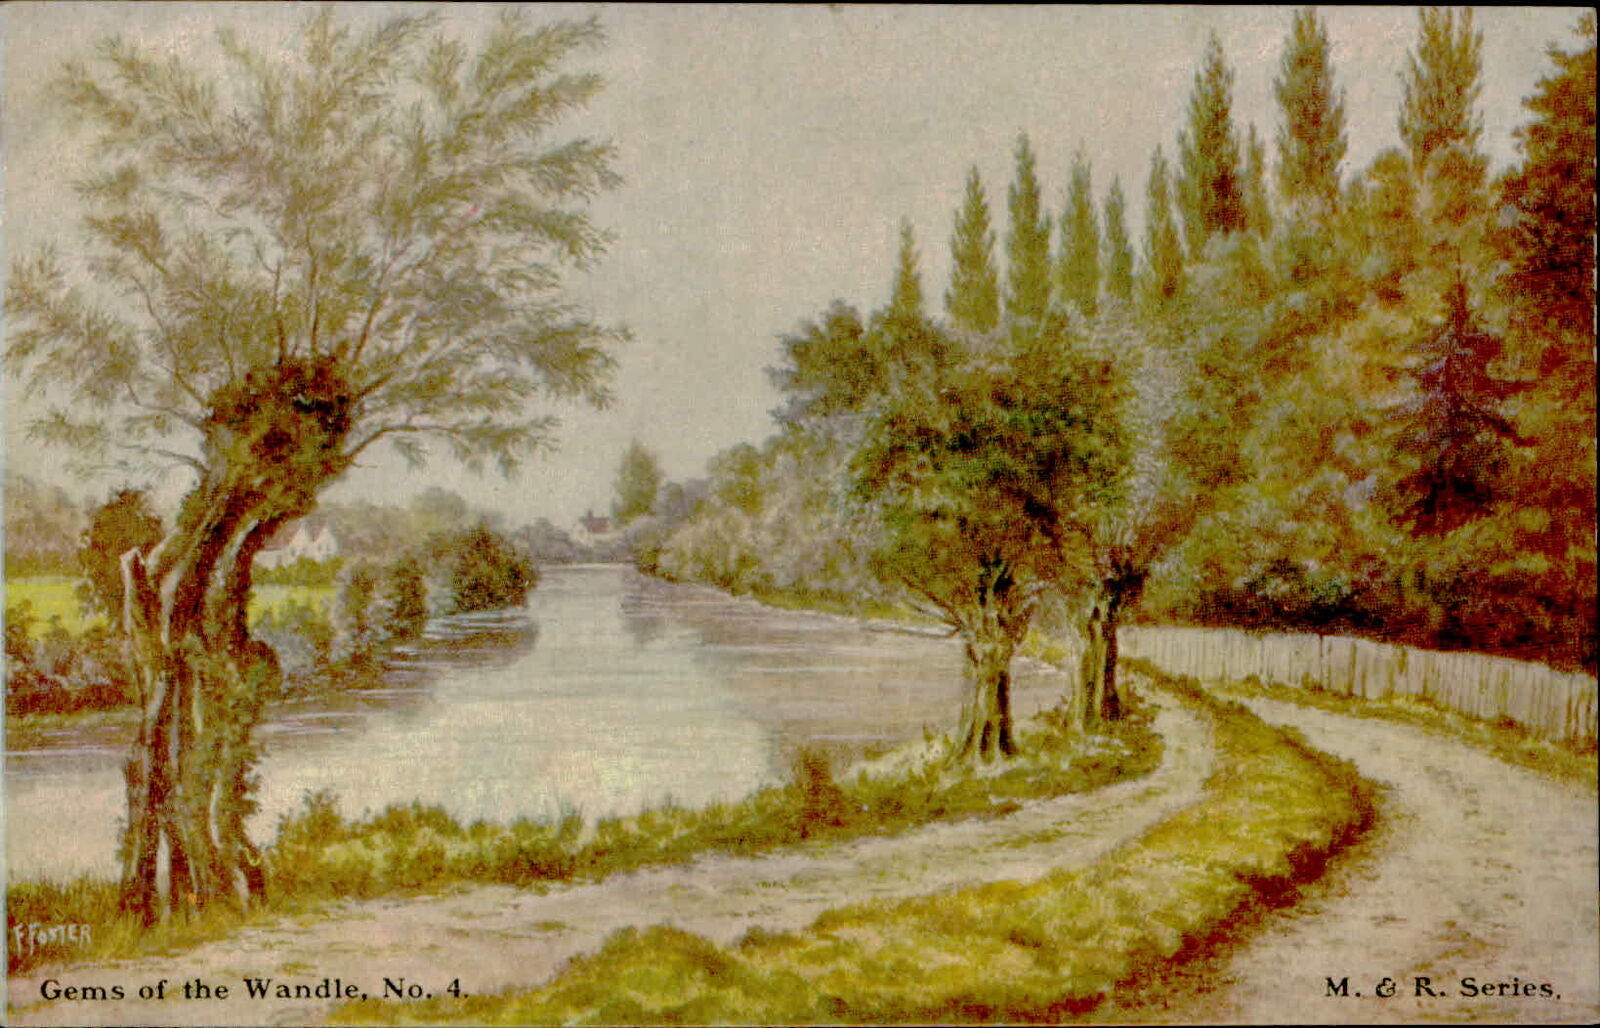 Postcard: FOSTER Gems of the Wandle, No. 4. M. & R. Series,